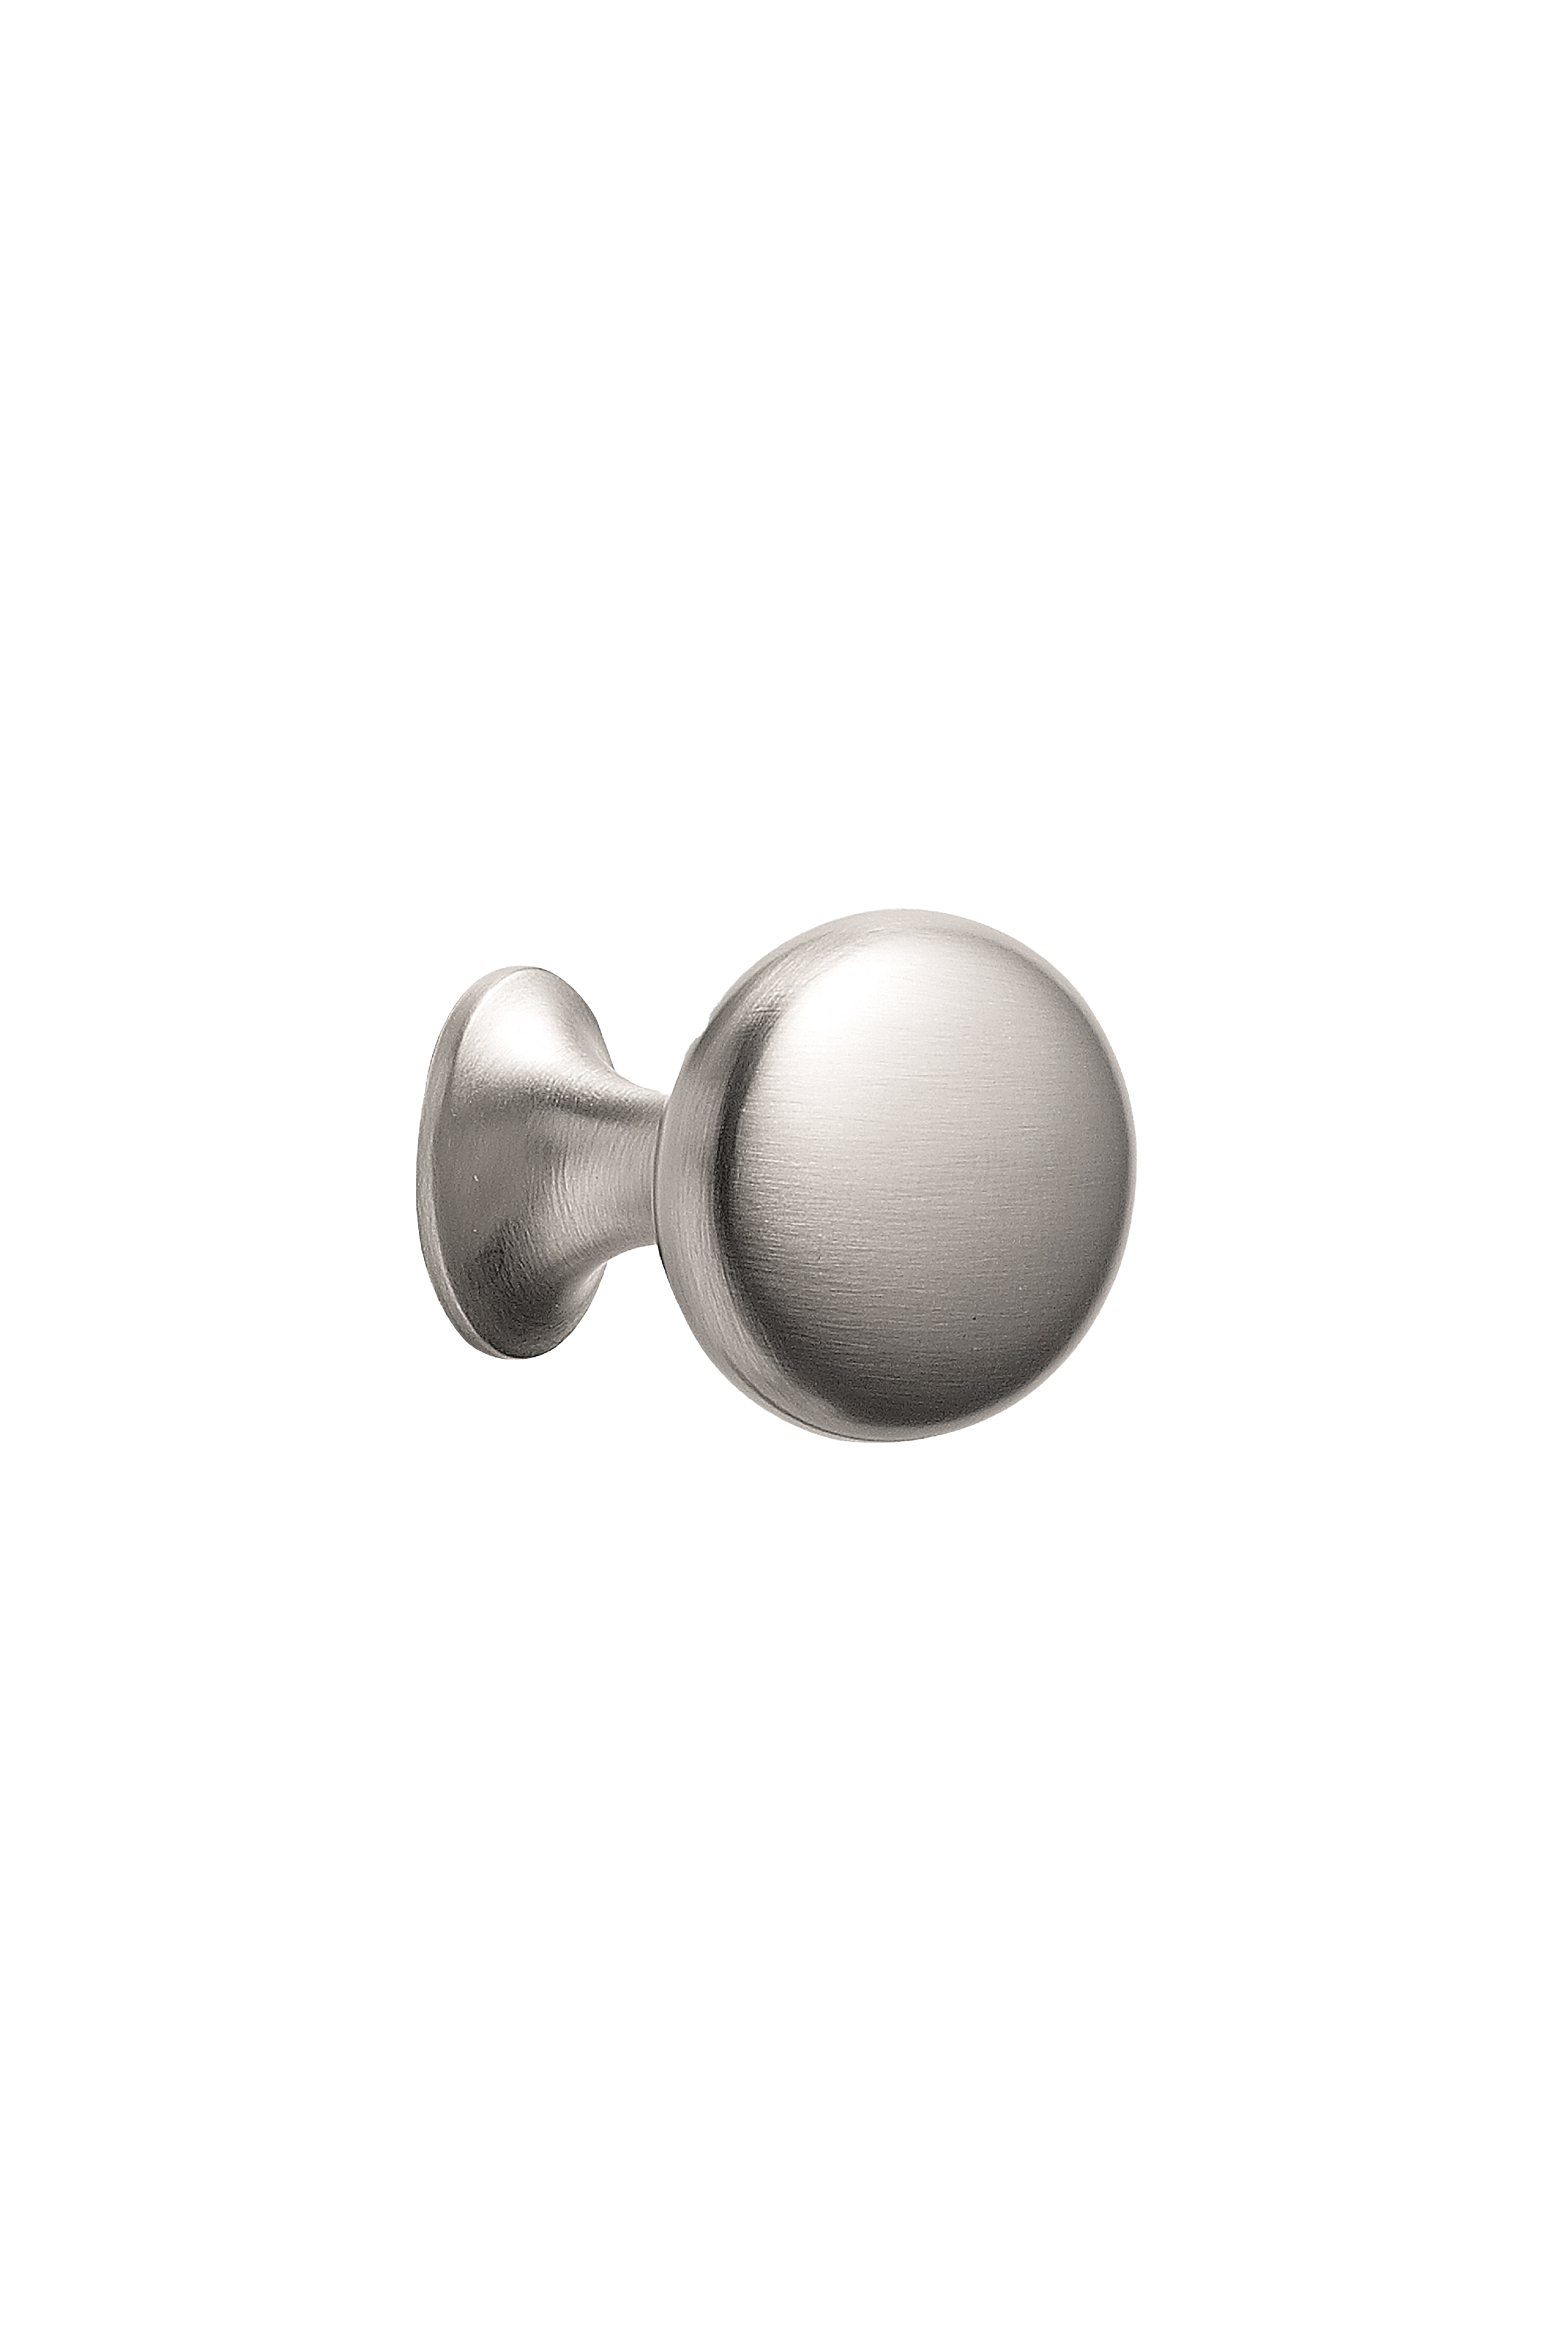 OVAL SIMPLE w/O-Ring knop, zink, stål • Furnipart